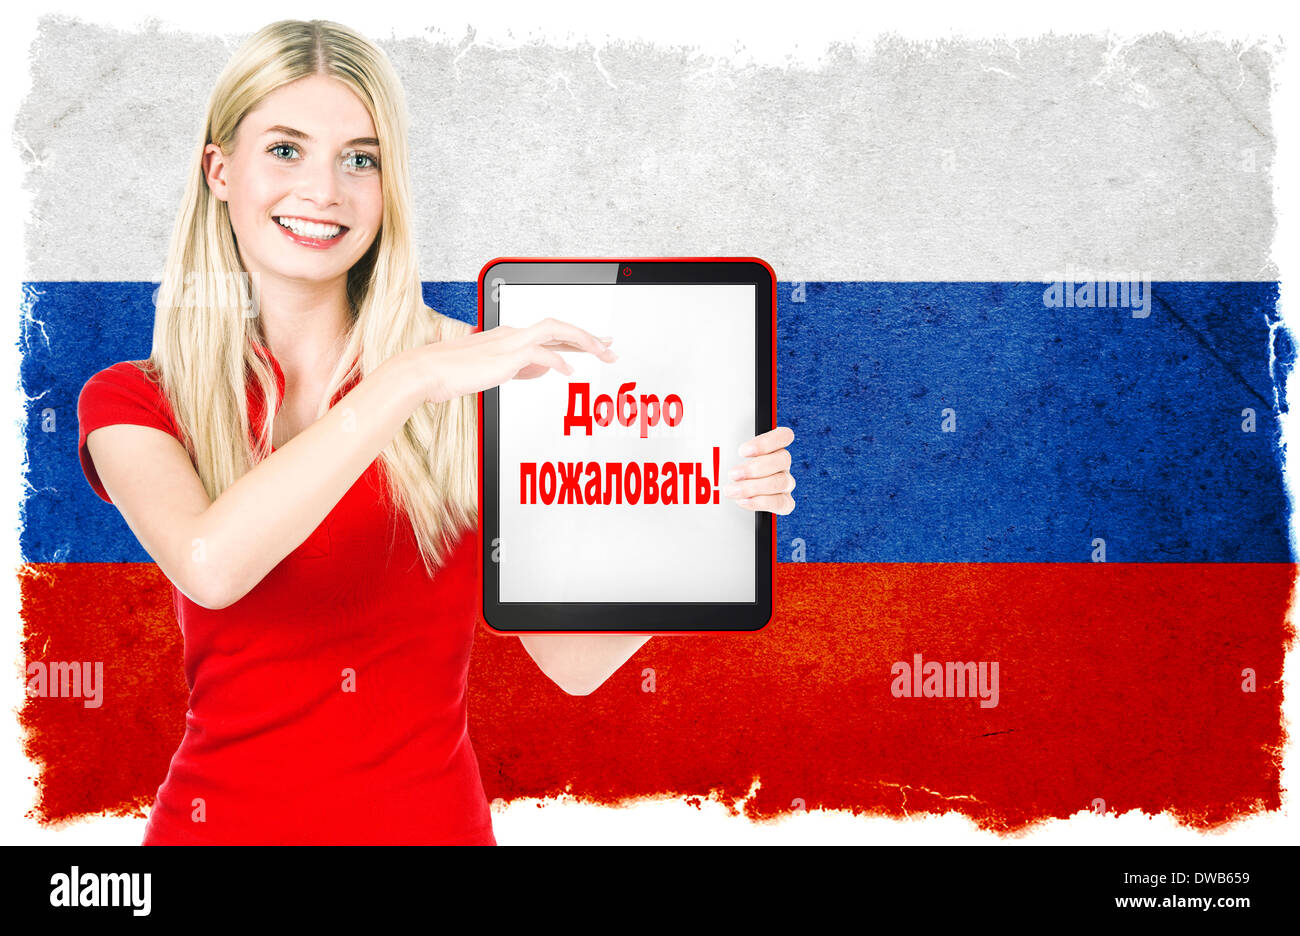 young woman with russian national flag on the background holding tablet pc Stock Photo